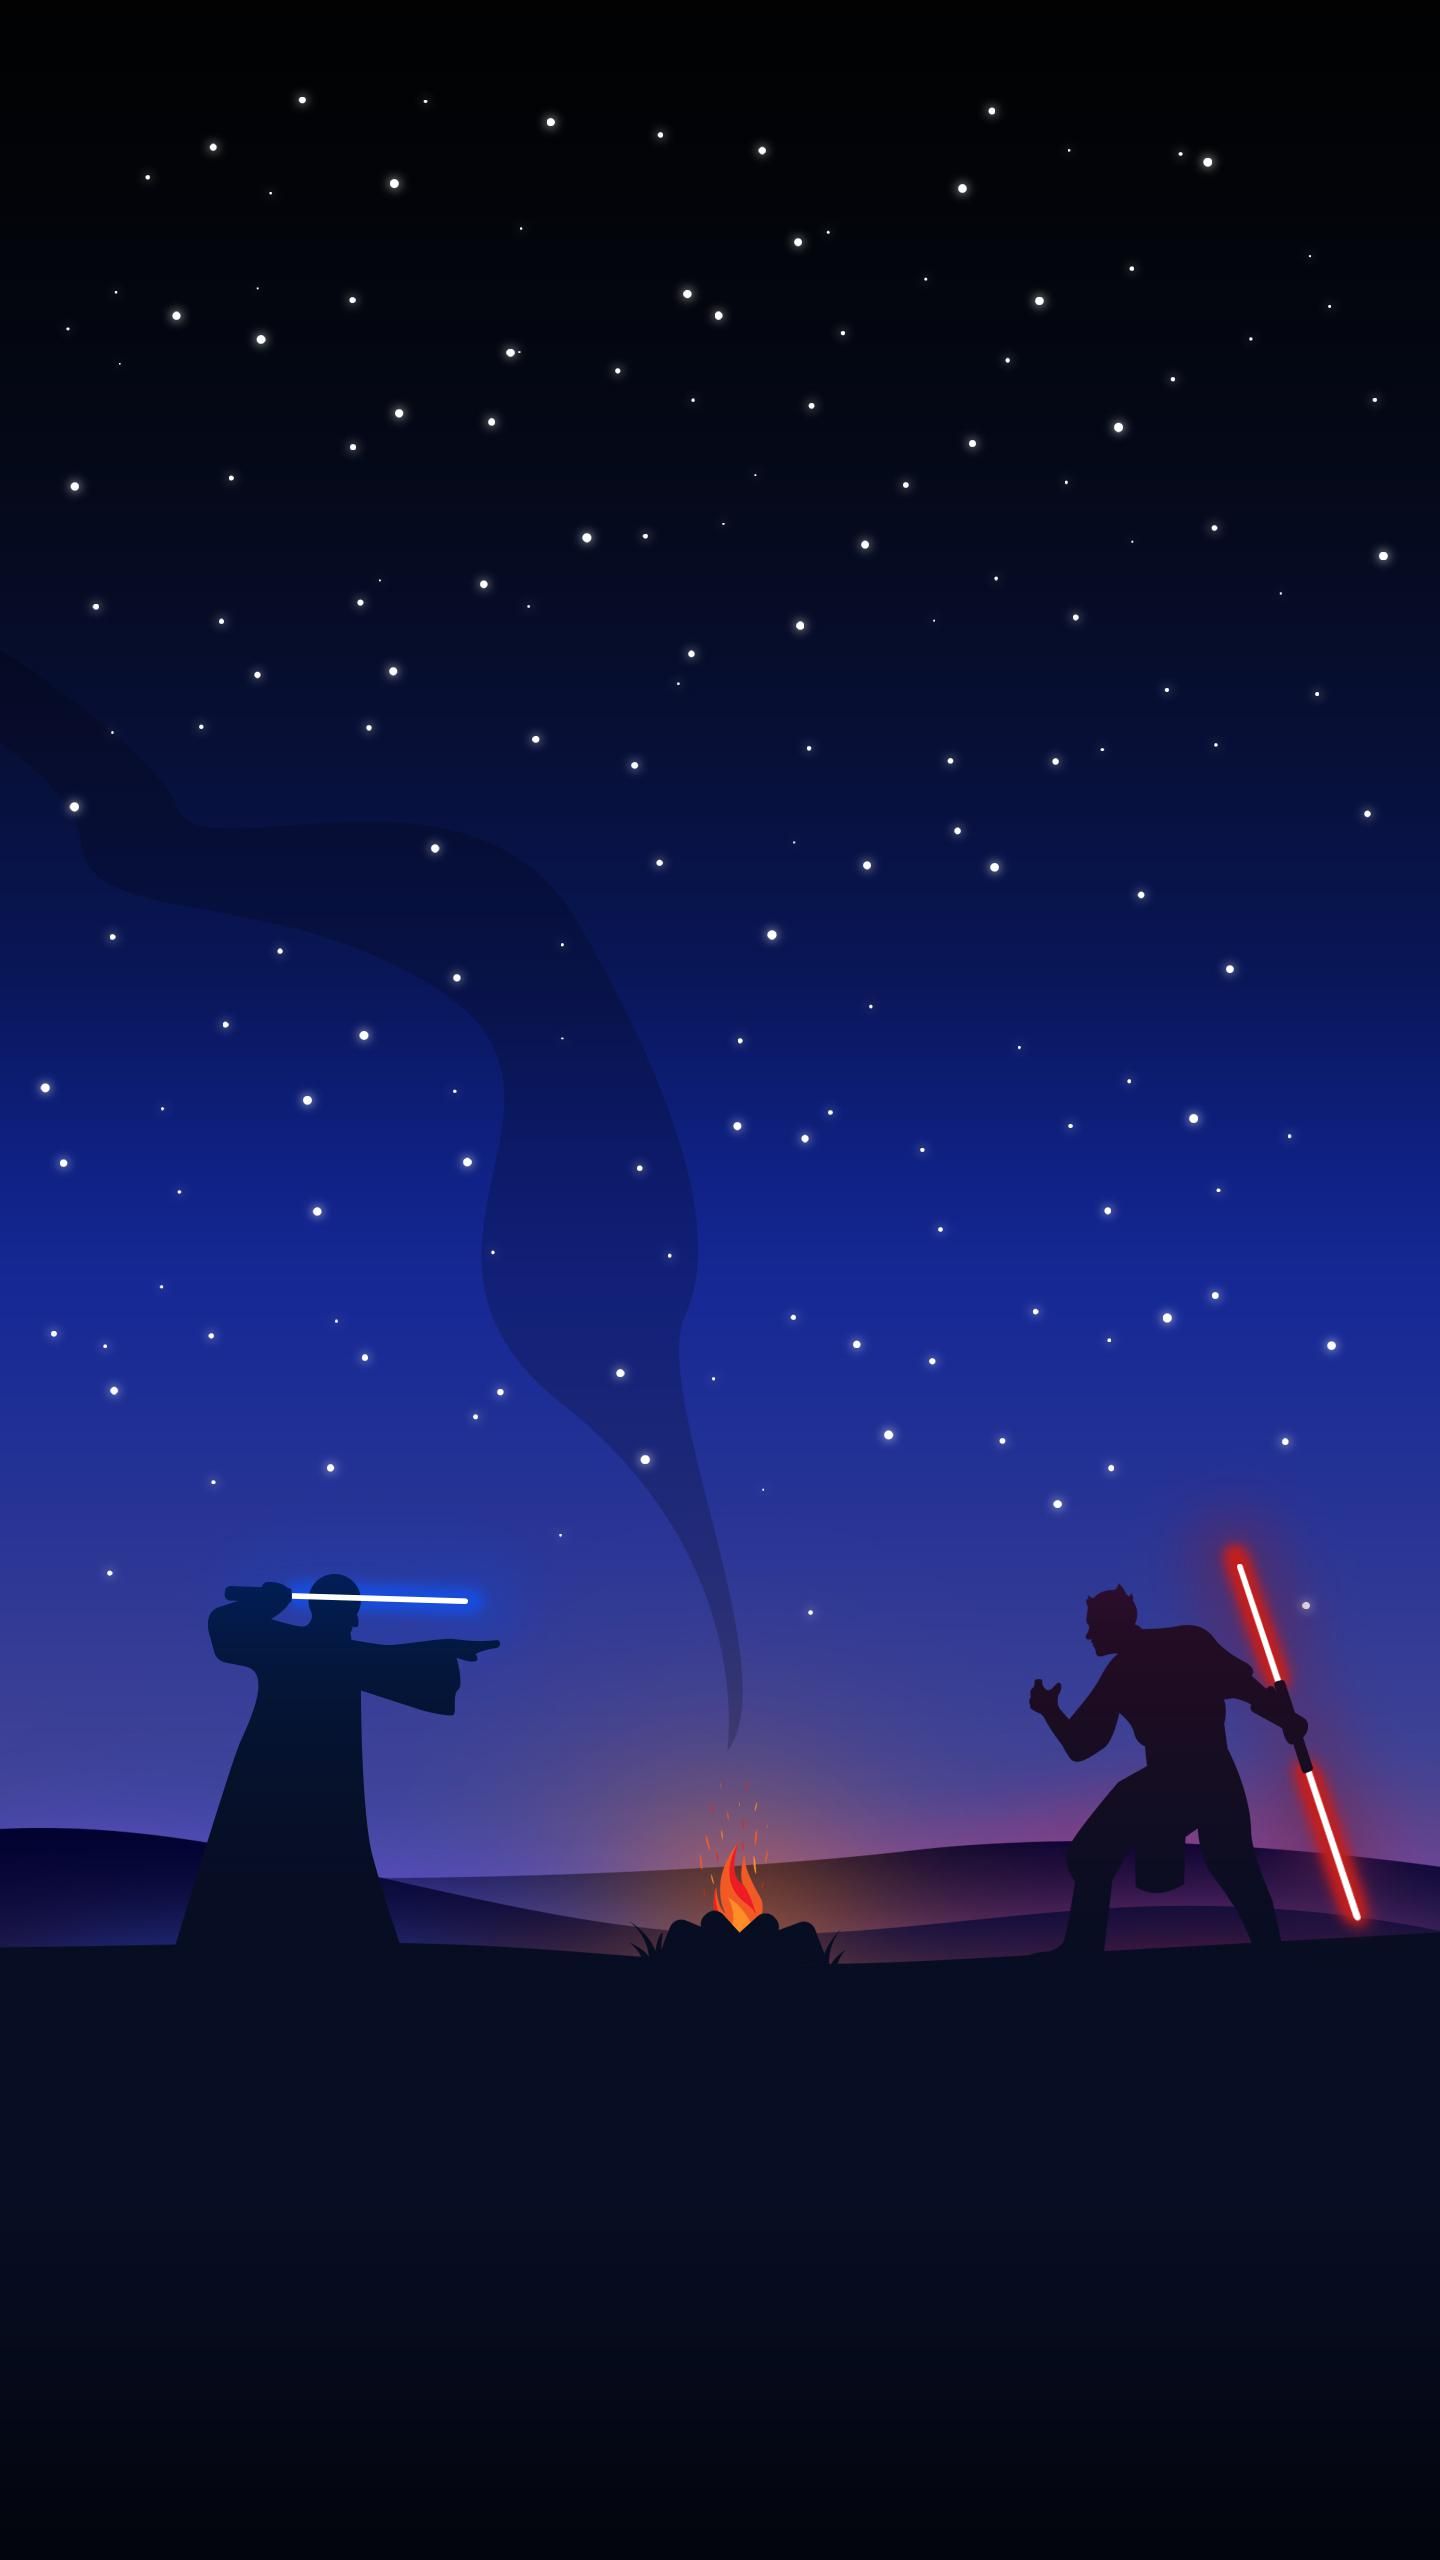 A star wars poster with two lightsabers - Star Wars